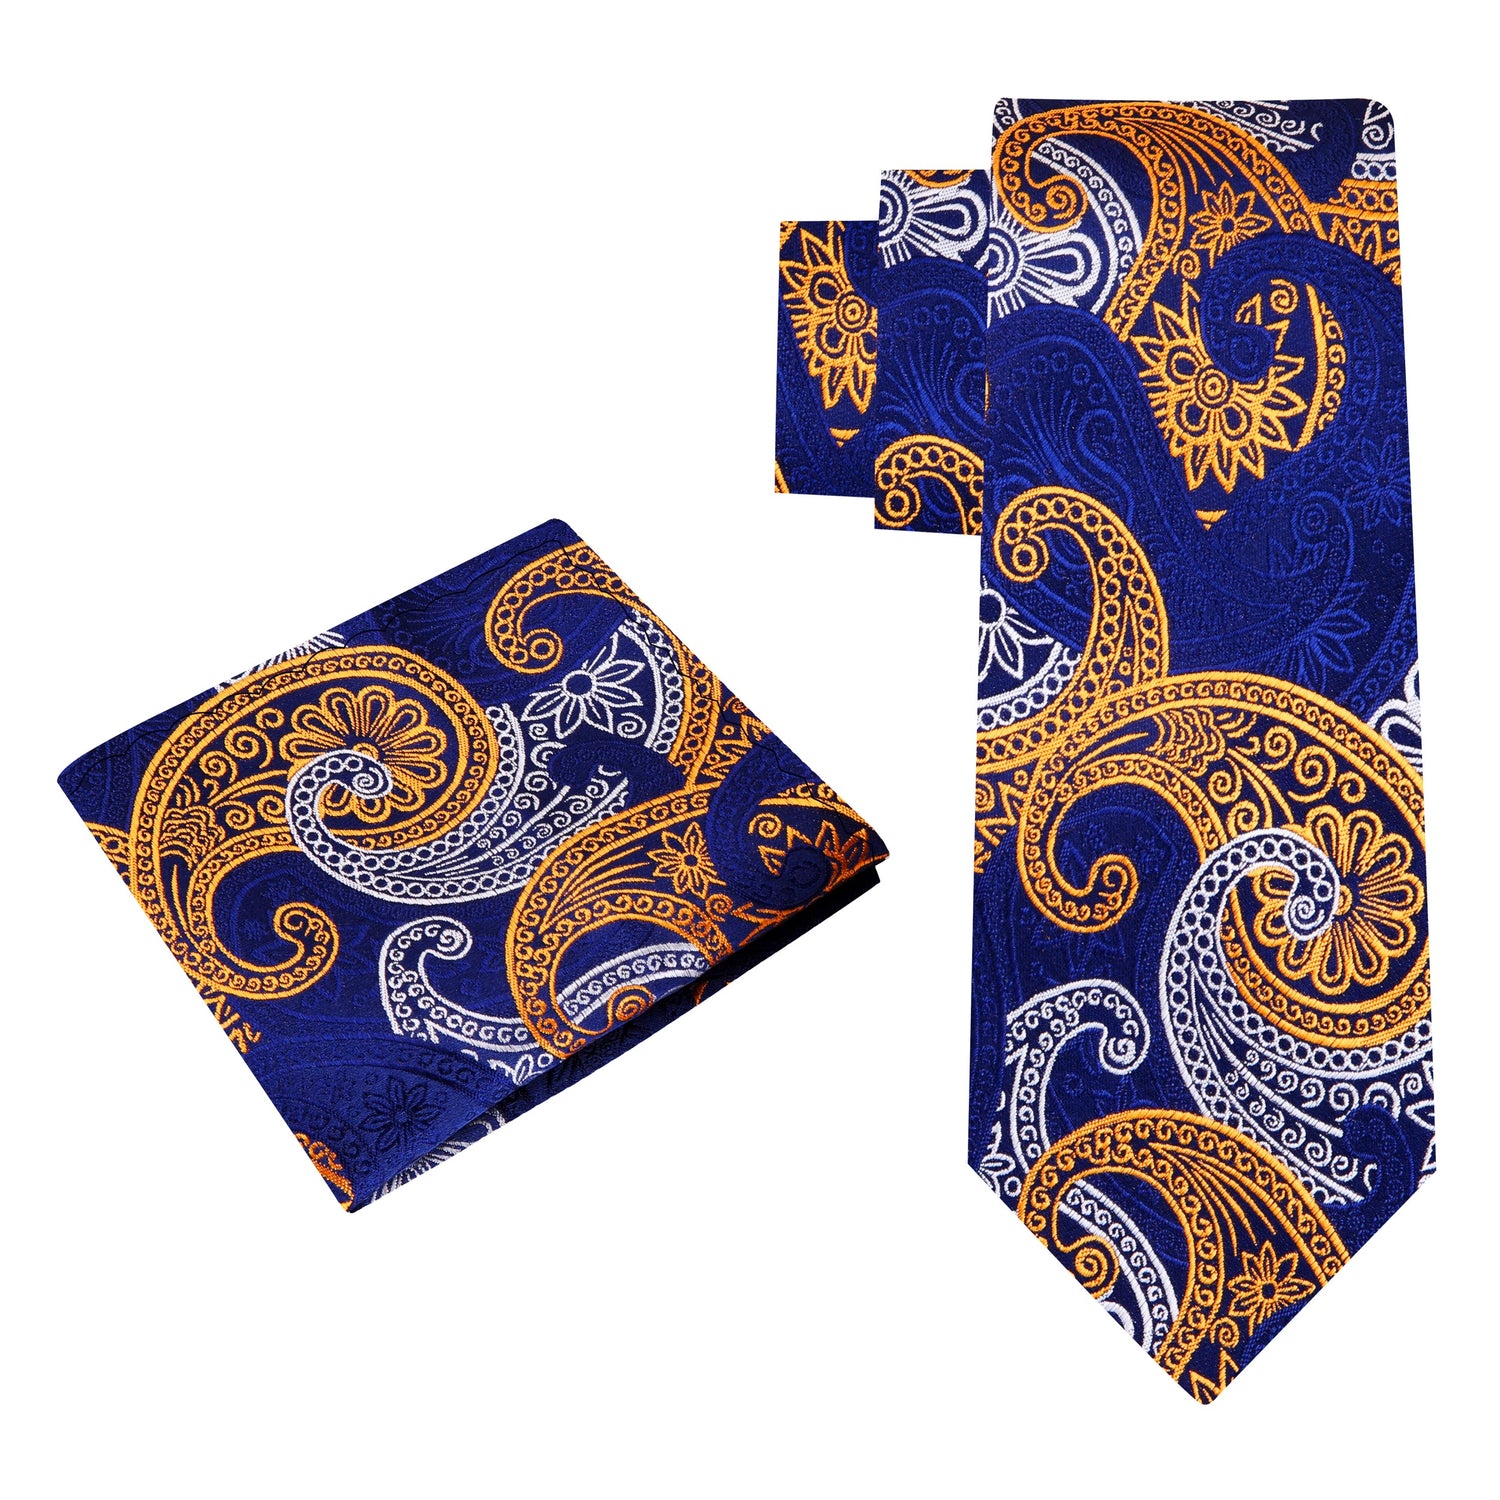 Alt View: Blue, Yellow Gold, White Paisley Tie and Matching Square